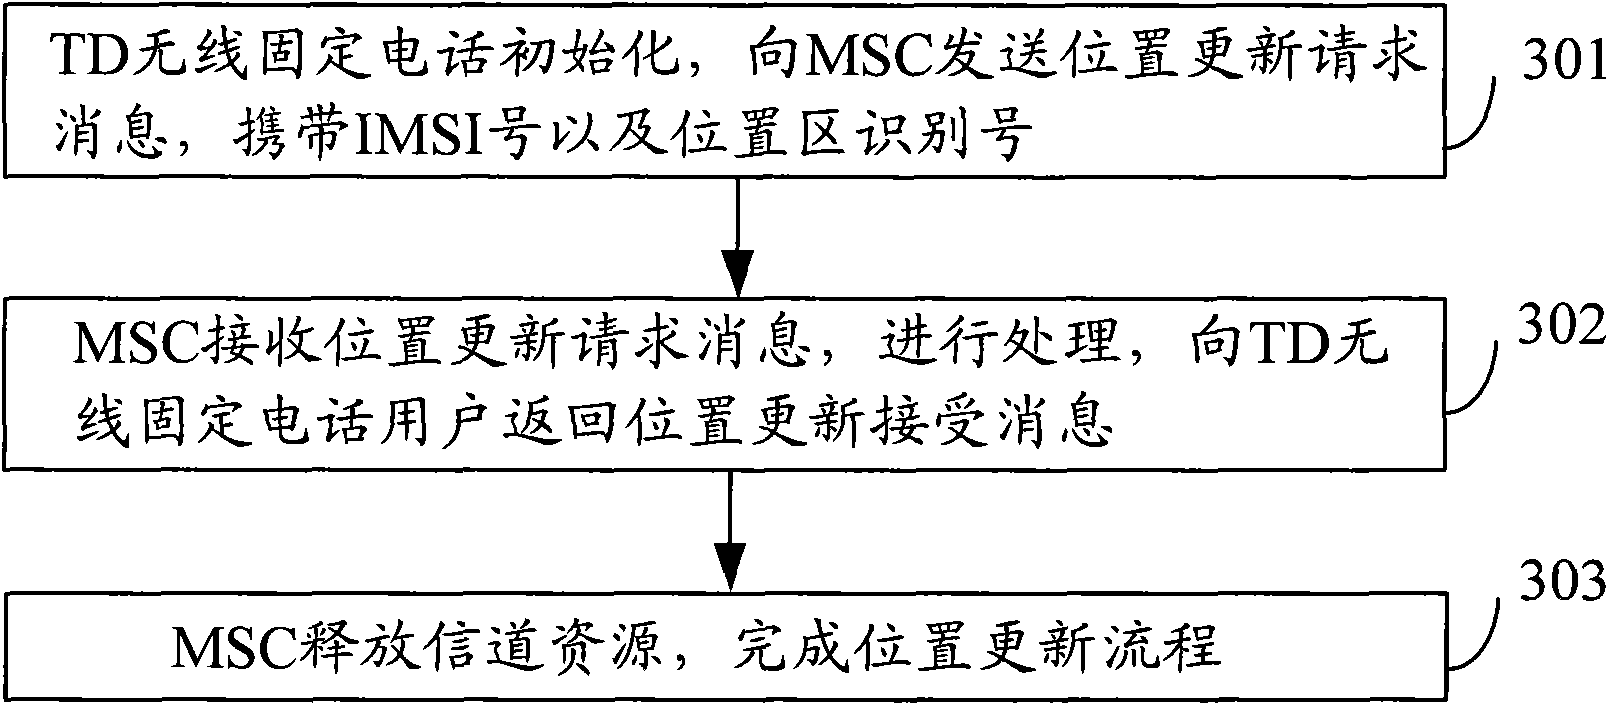 Method and system for allocating telephone number resources in mobile communication network